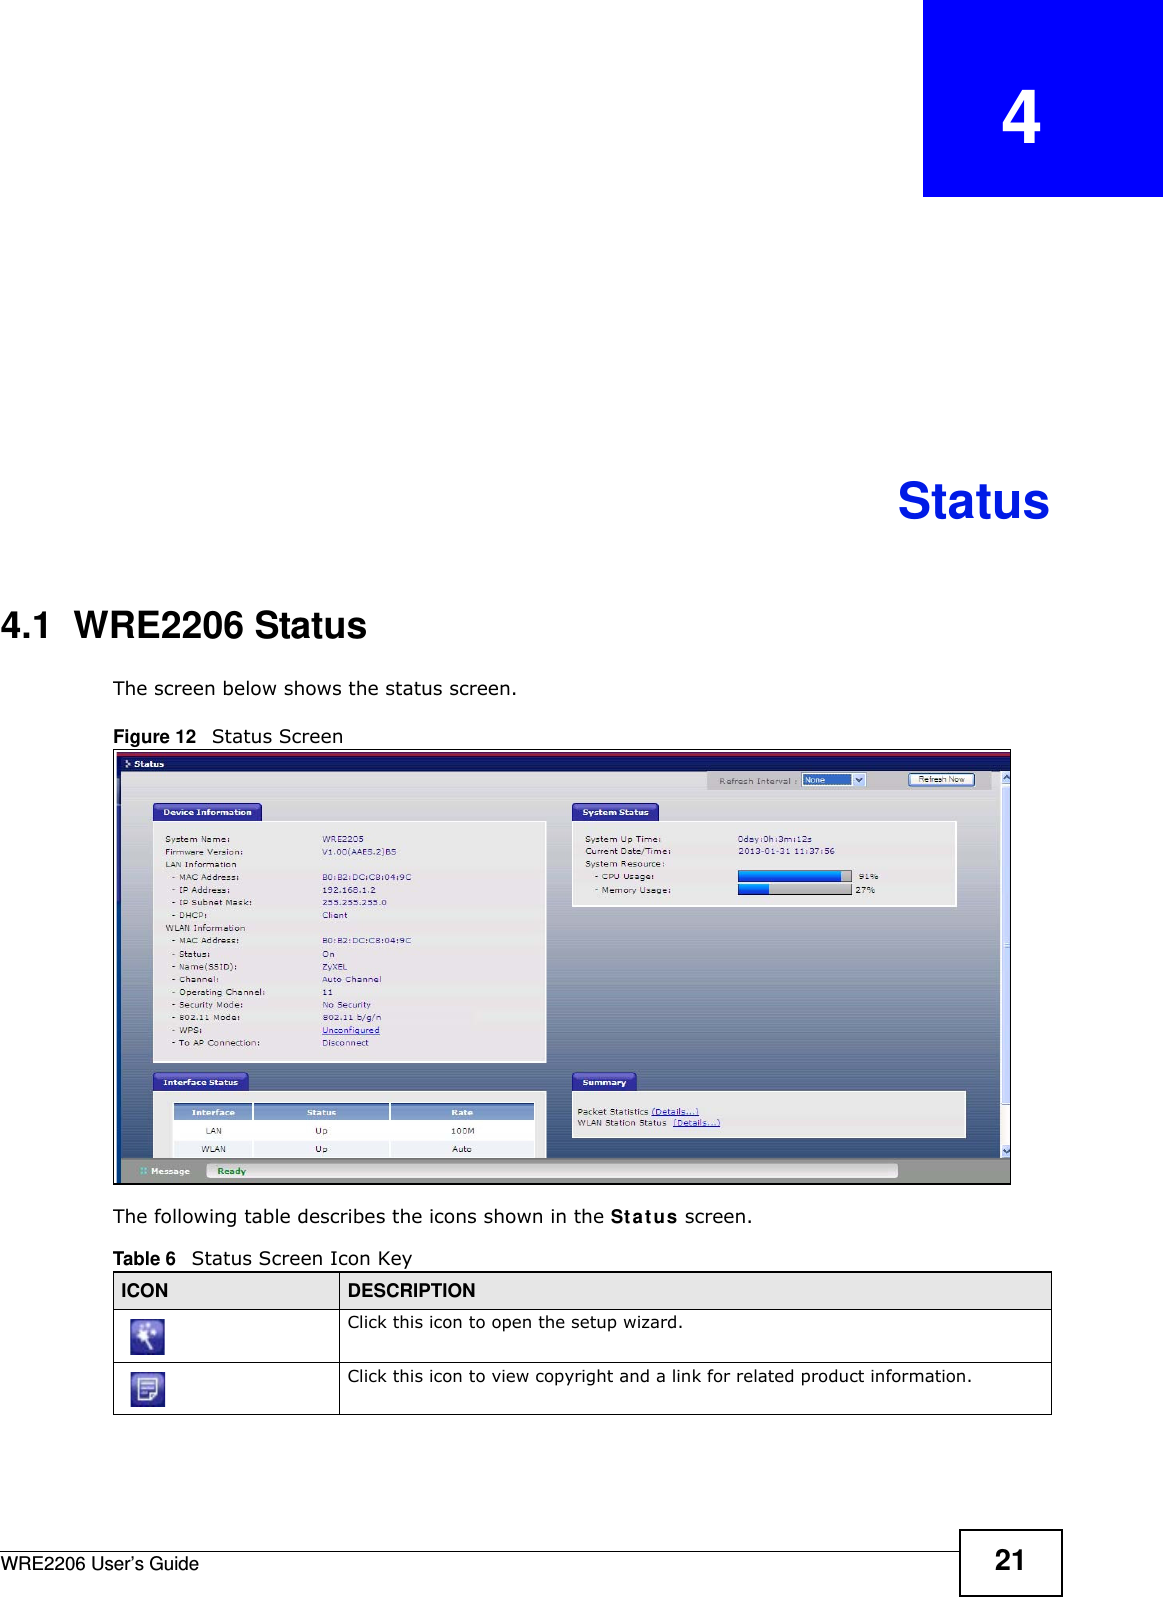 WRE2206 User’s Guide 21CHAPTER   4Status4.1  WRE2206 StatusThe screen below shows the status screen. Figure 12   Status Screen The following table describes the icons shown in the St a t us screen.Table 6   Status Screen Icon Key ICON DESCRIPTIONClick this icon to open the setup wizard. Click this icon to view copyright and a link for related product information.